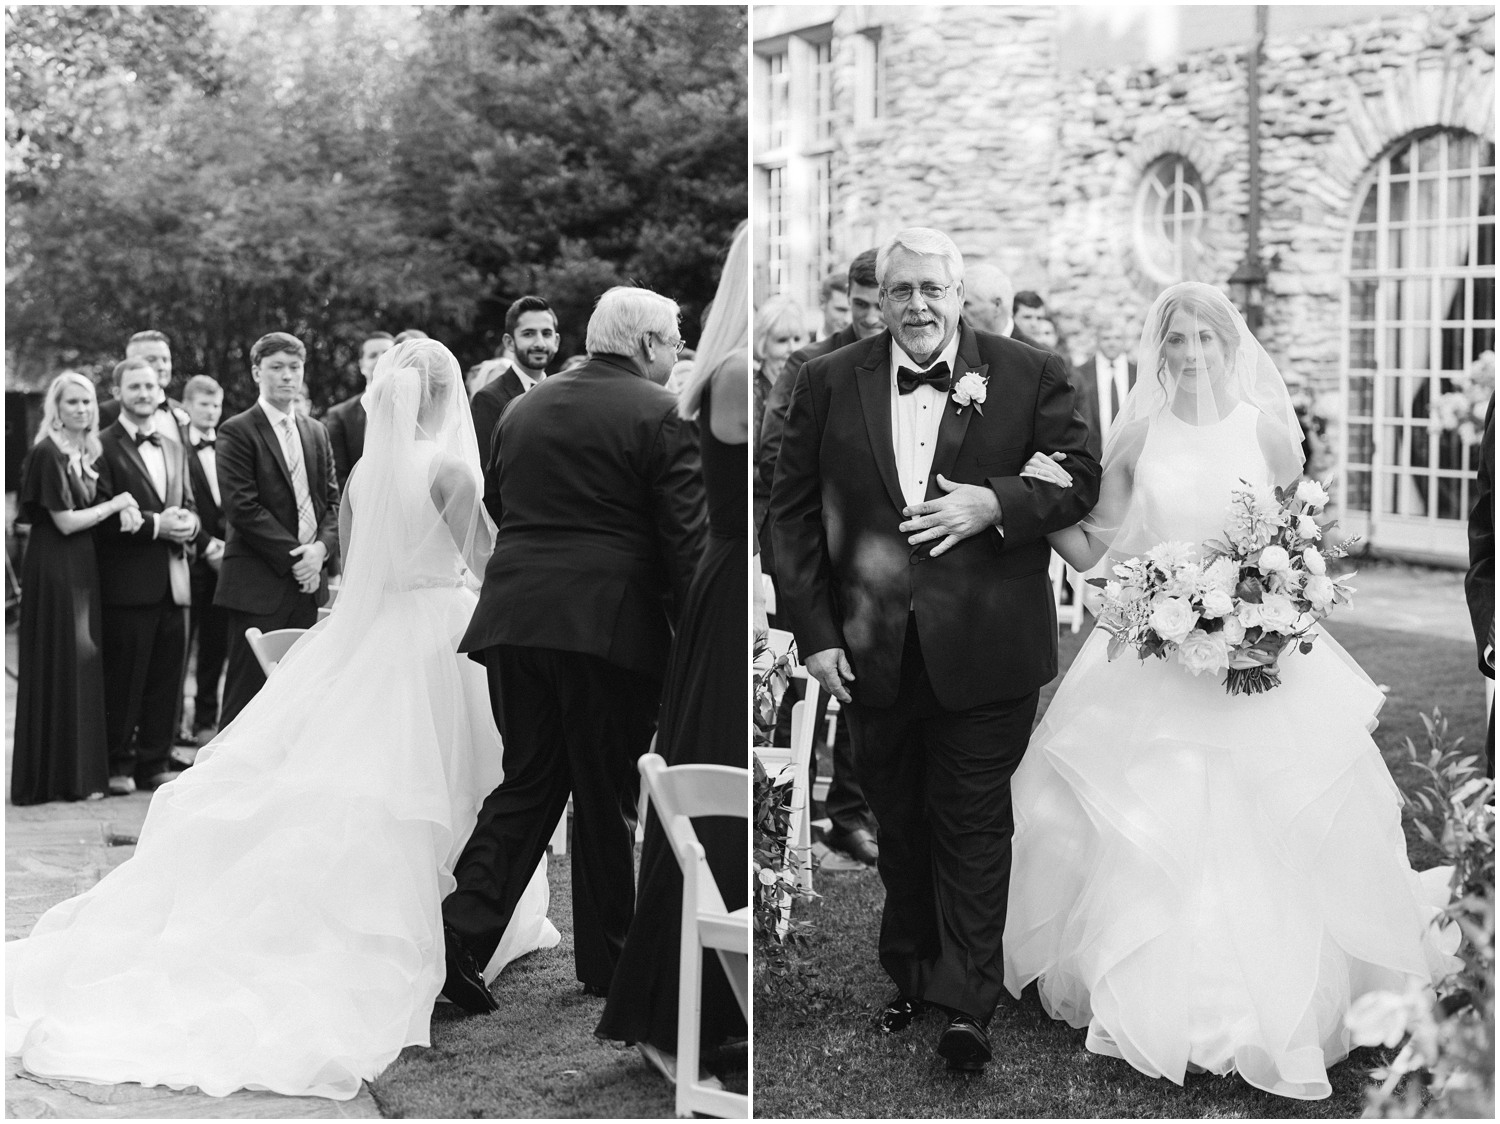 Father escorts bride down the aisle for outdoor wedding ceremony at Graylyn Estate